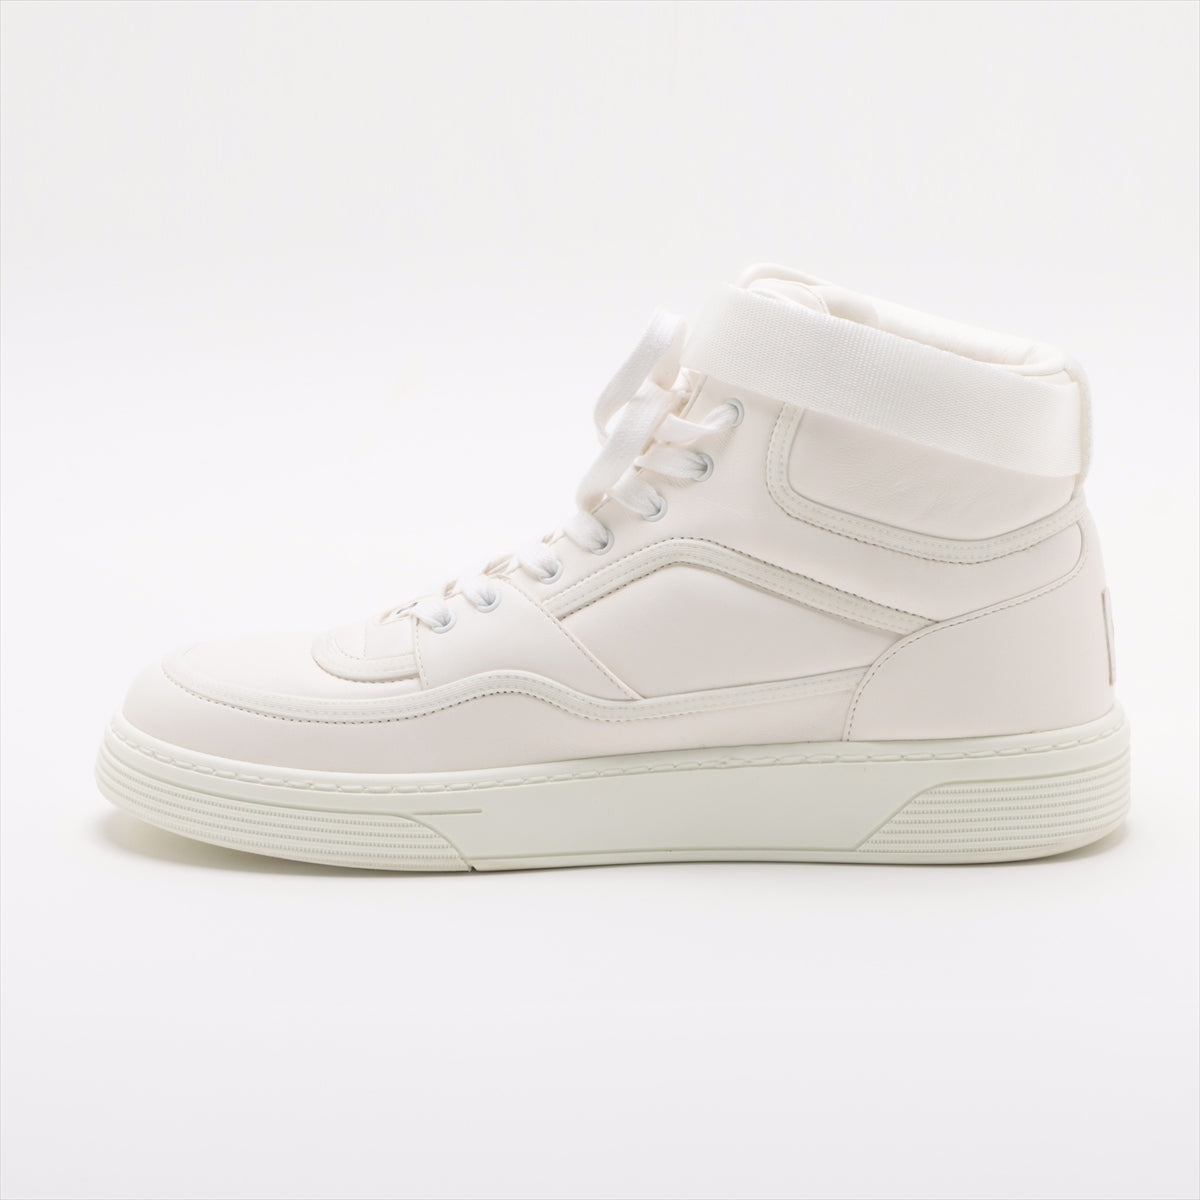 Chanel Coco Mark Leather High-top Sneakers 41 Men's White G35062 Is there a replacement string